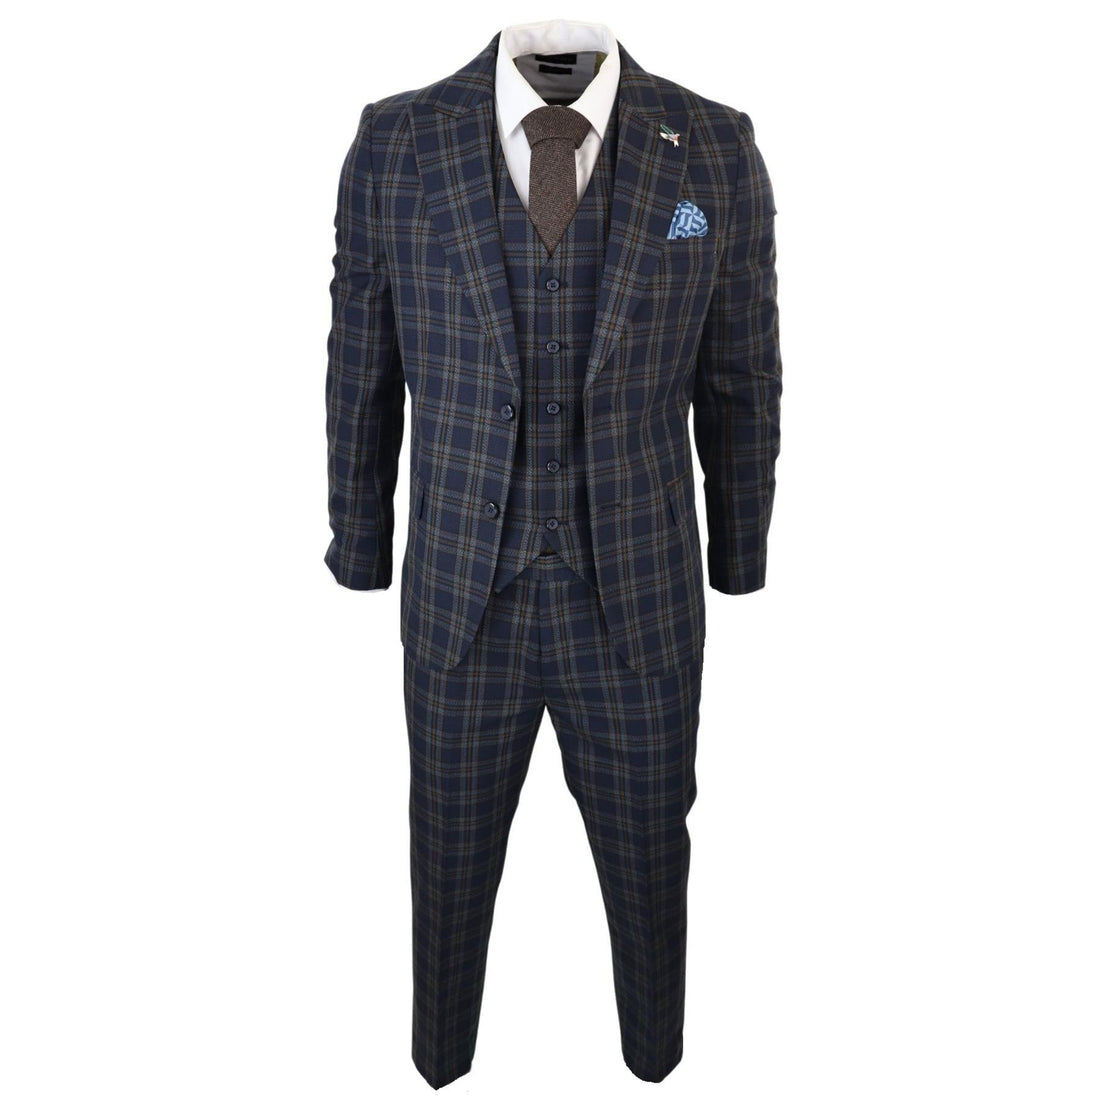 Men's Navy Blue 3 Piece Check Suit Formal Business Dress Suits - Knighthood Store